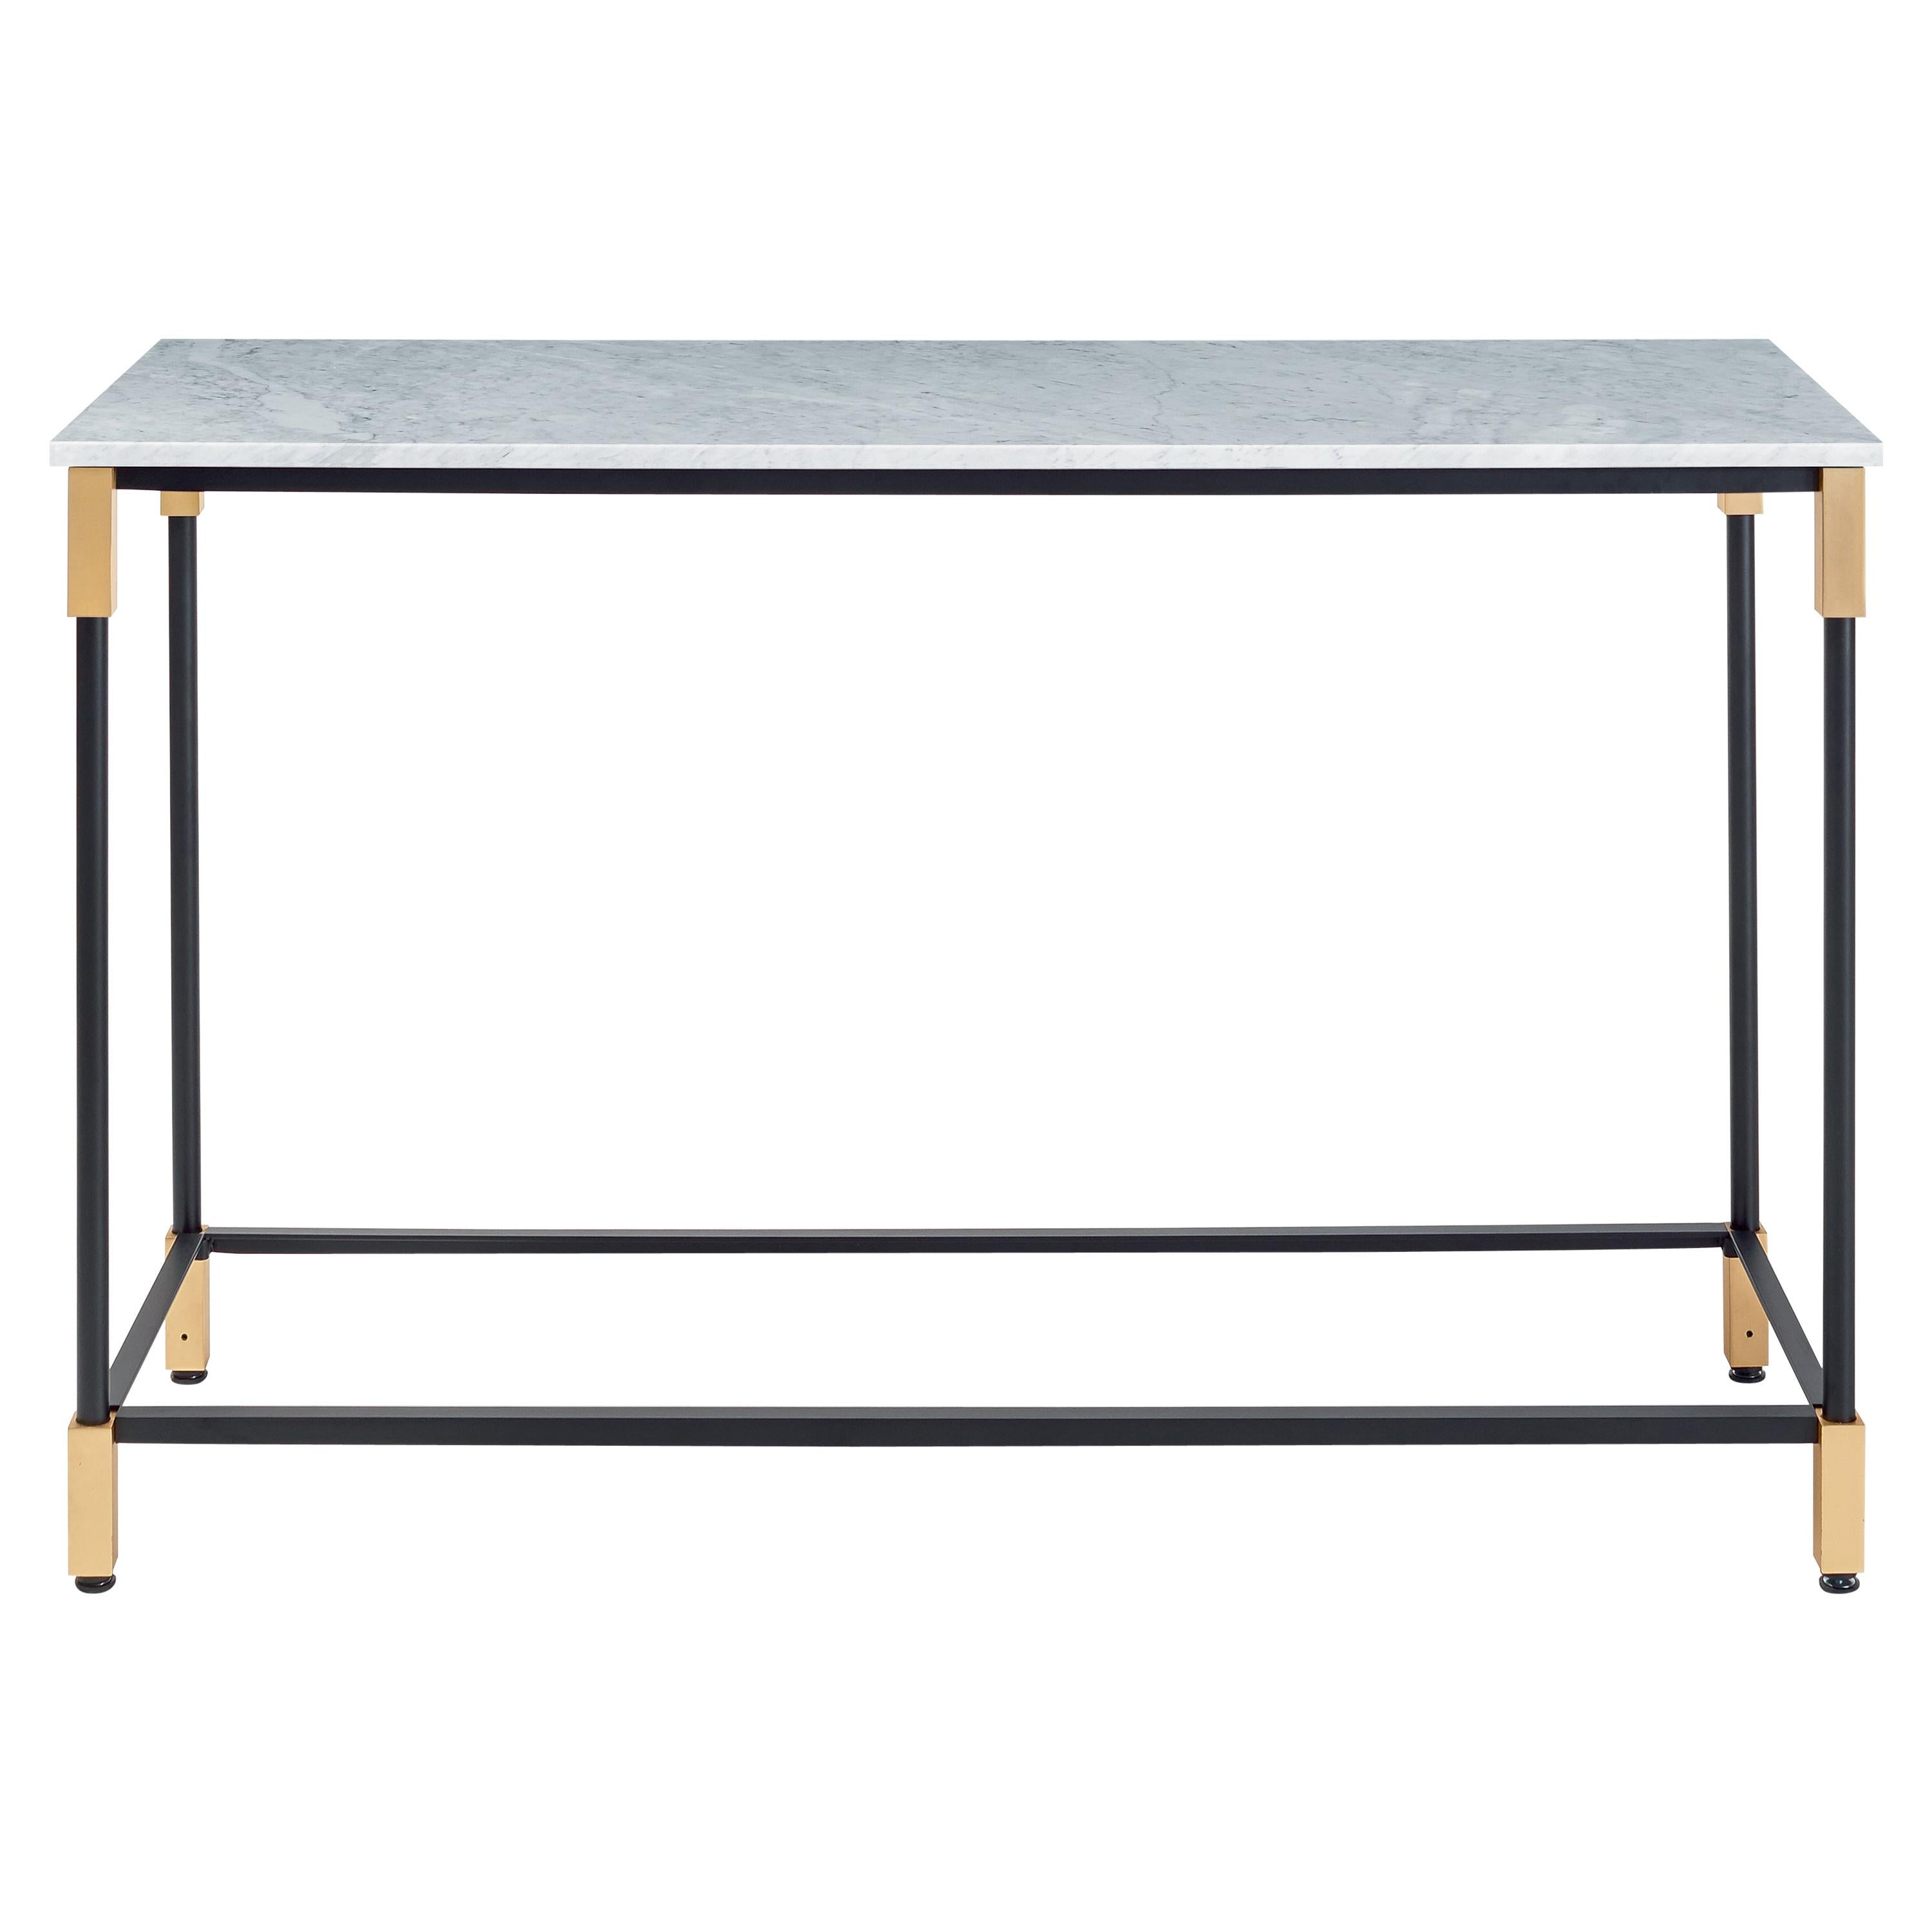 Arflex Match Console Table with Marble Top & Metal Legs by Bernhardt & Vella